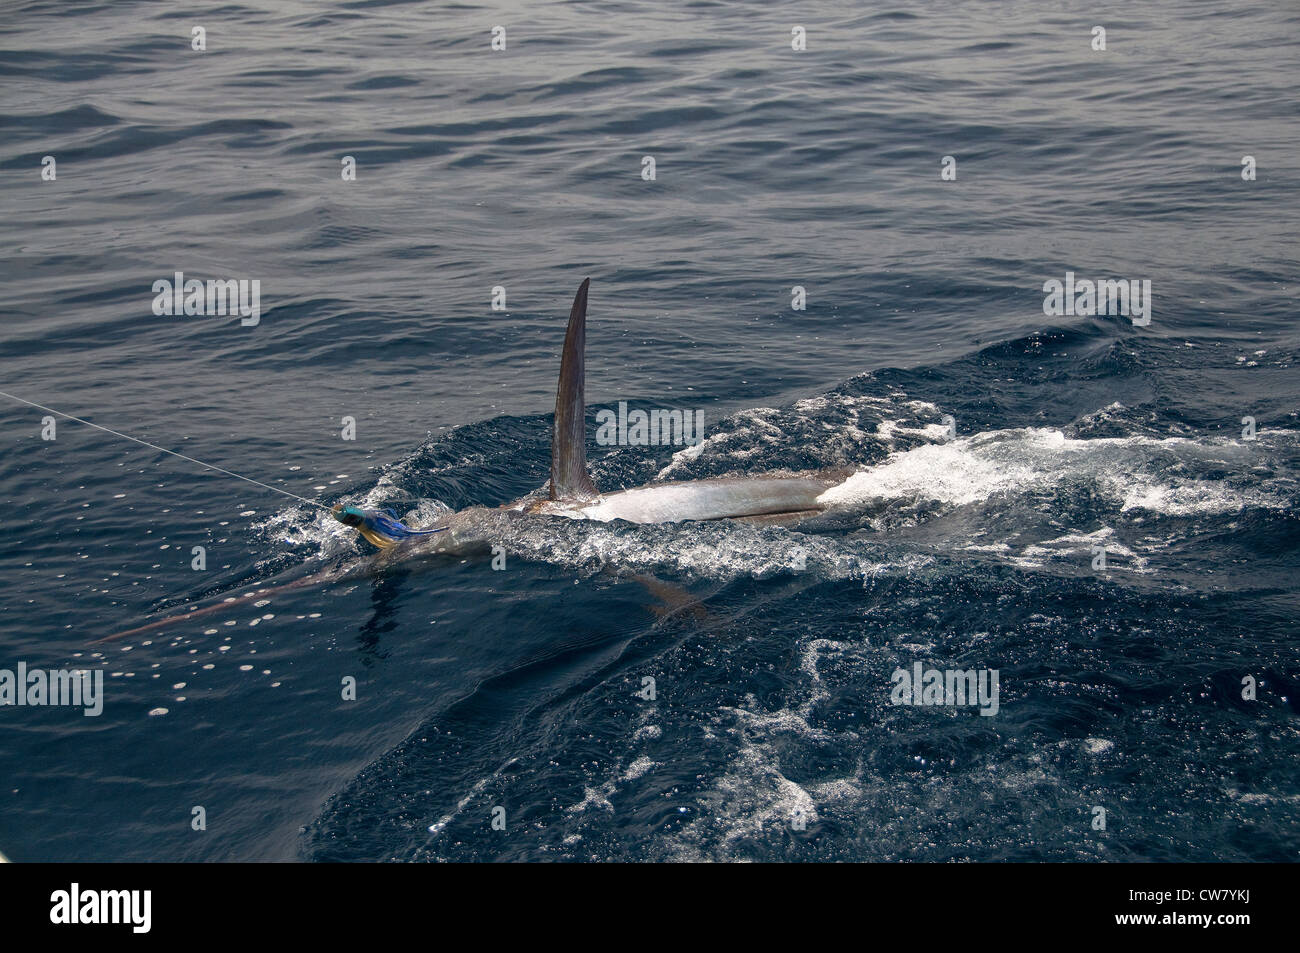 A 300 pound black marlin was fooled by the blue/green, skirted-rubber trolling plug in the Pacific Ocean. Stock Photo